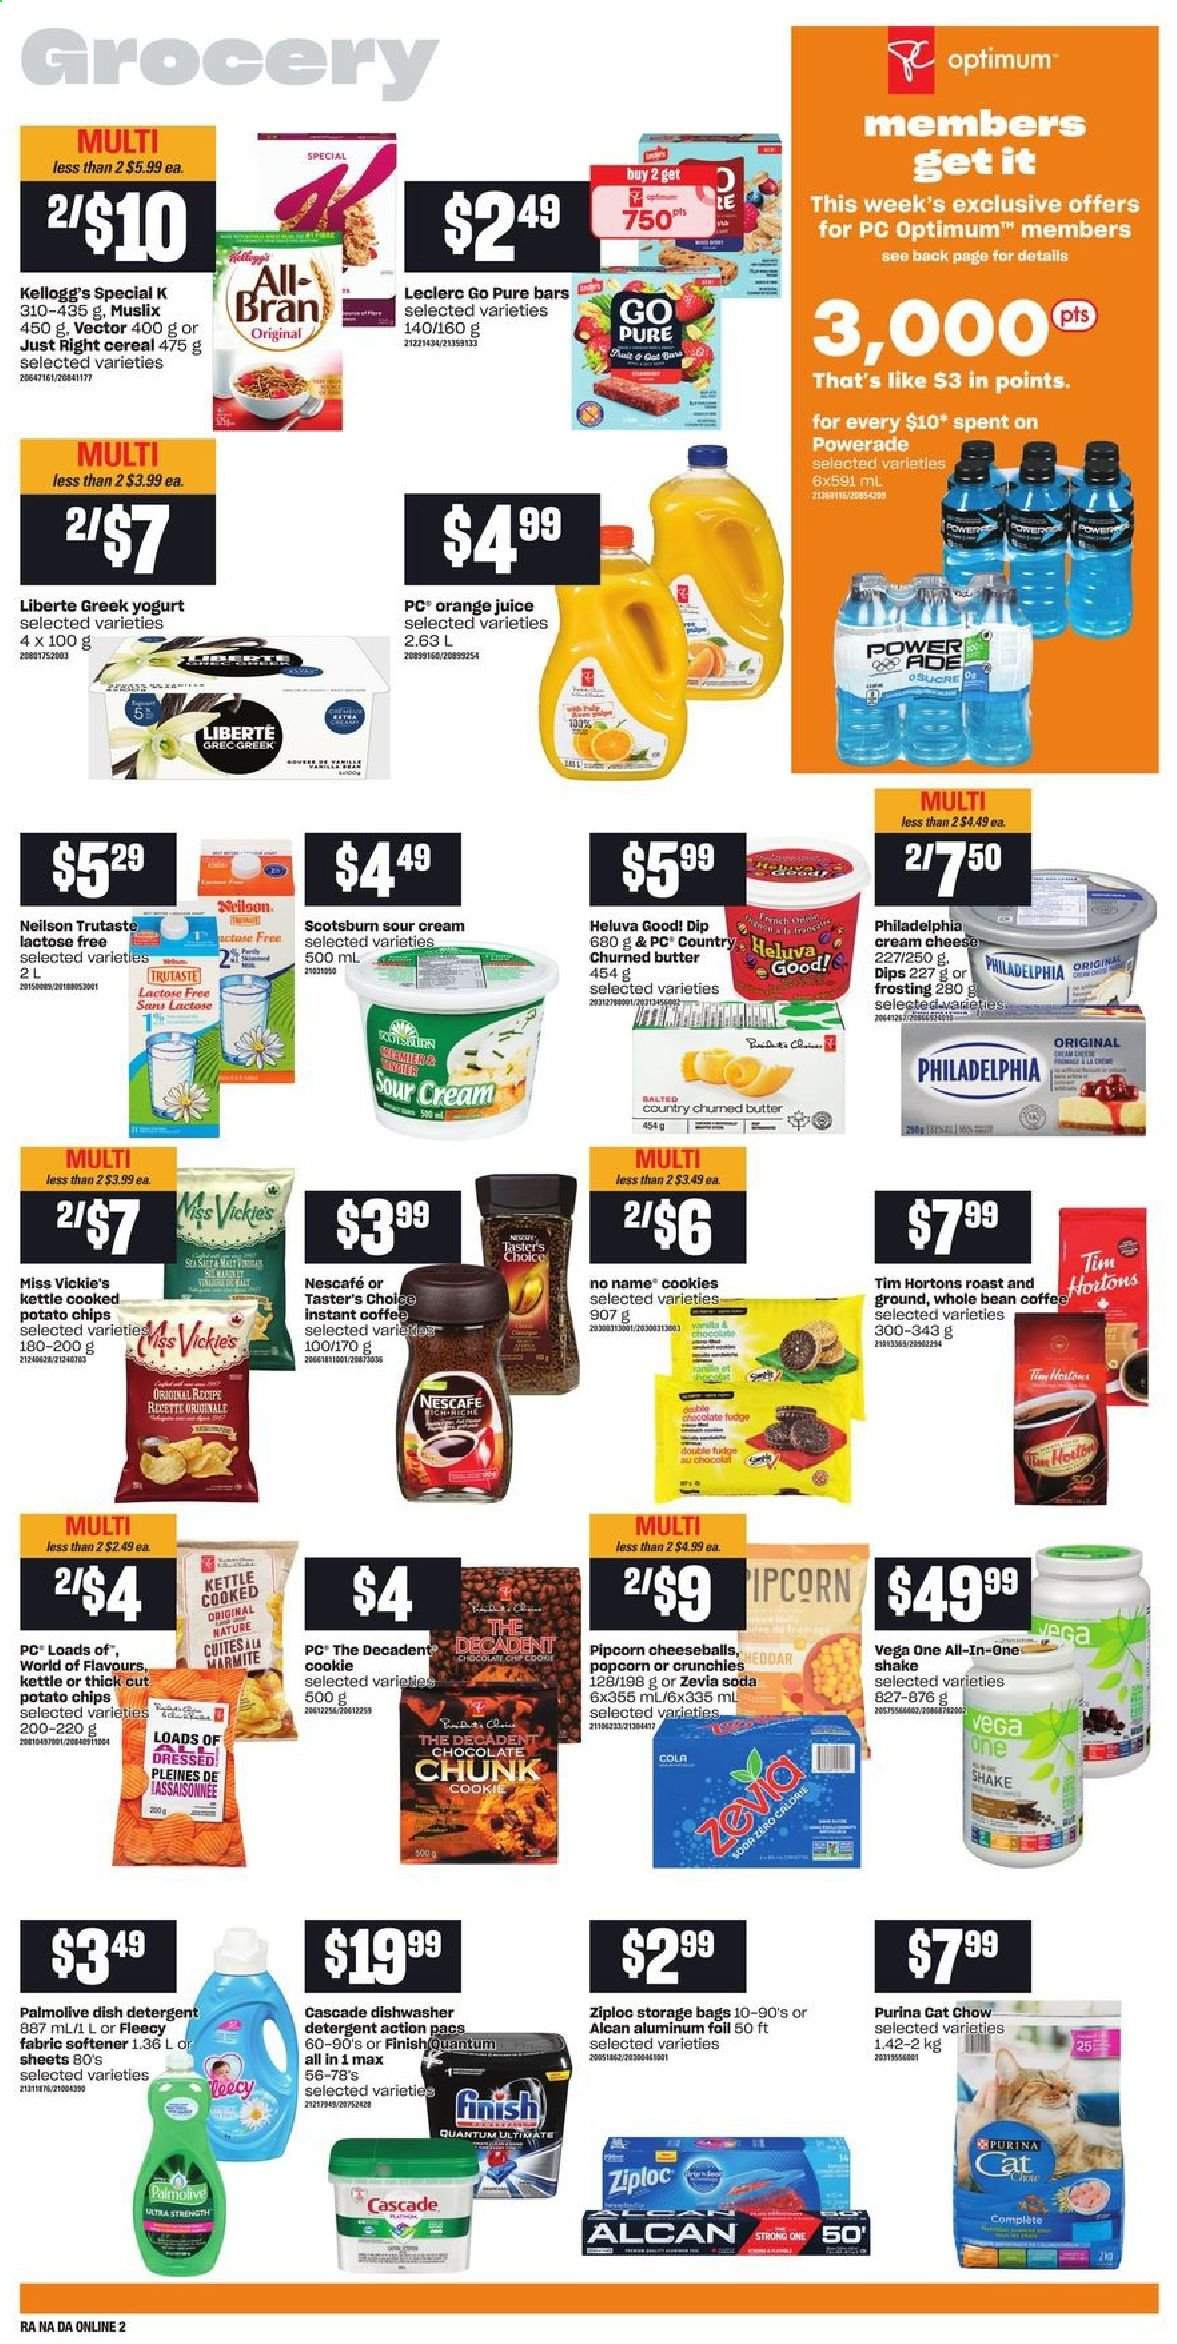 thumbnail - Atlantic Superstore Flyer - May 20, 2021 - May 26, 2021 - Sales products - No Name, cream cheese, cheese, greek yoghurt, yoghurt, shake, butter, sour cream, cookies, fudge, chocolate, Kellogg's, potato chips, popcorn, frosting, cereals, All-Bran, Powerade, orange juice, juice, soda, instant coffee, fabric softener, Cascade, Finish Powerball, Finish Quantum Ultimate, Palmolive, bag, Ziploc, Purina, Optimum, chips, Nescafé. Page 6.